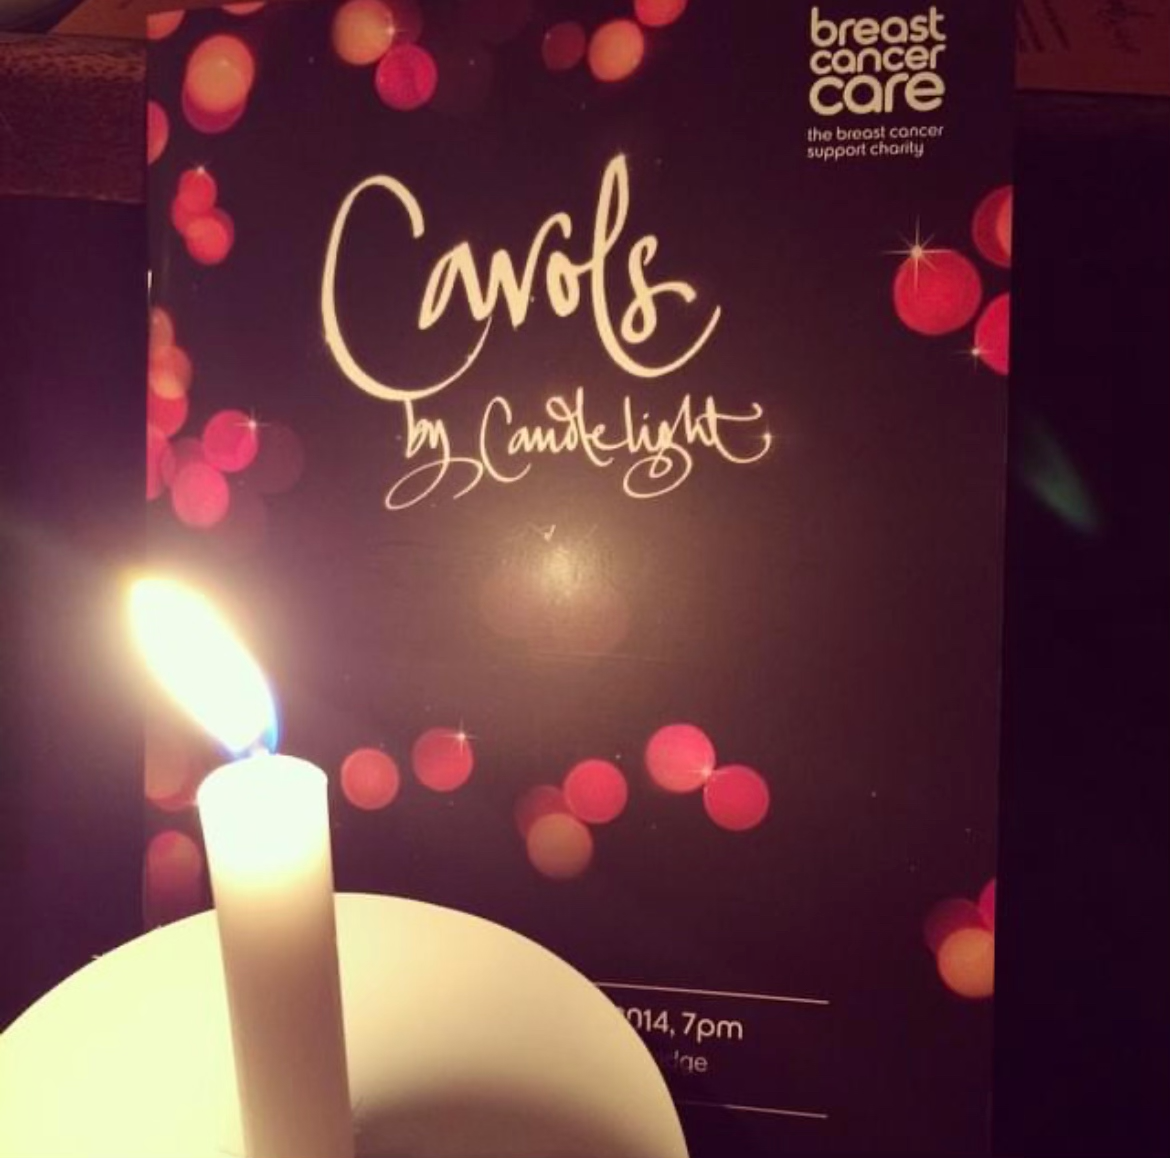 Carols by Candlelight for Breast Cancer Care in London